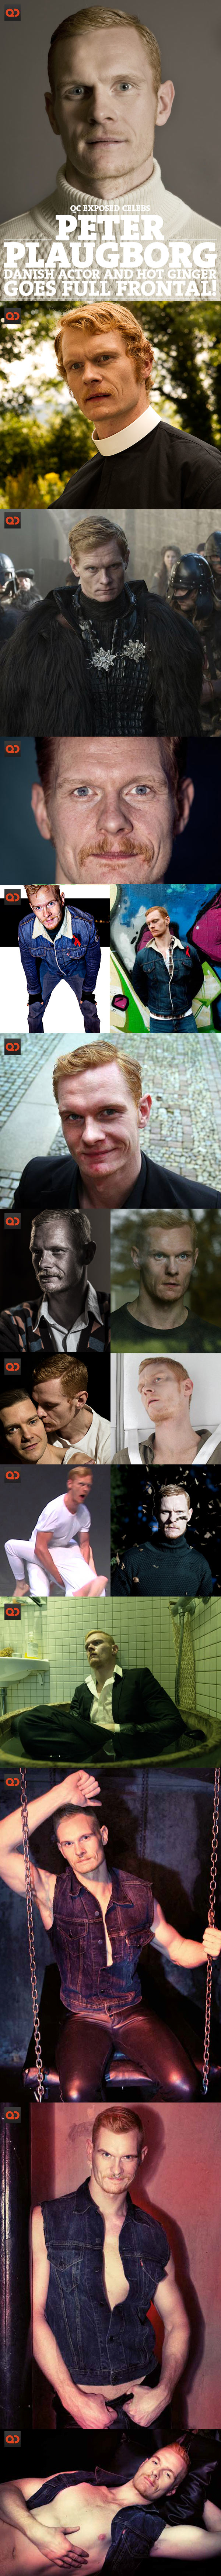 Peter Plaugborg, Danish Actor And Hot Ginger, Goes Full Frontal!!!